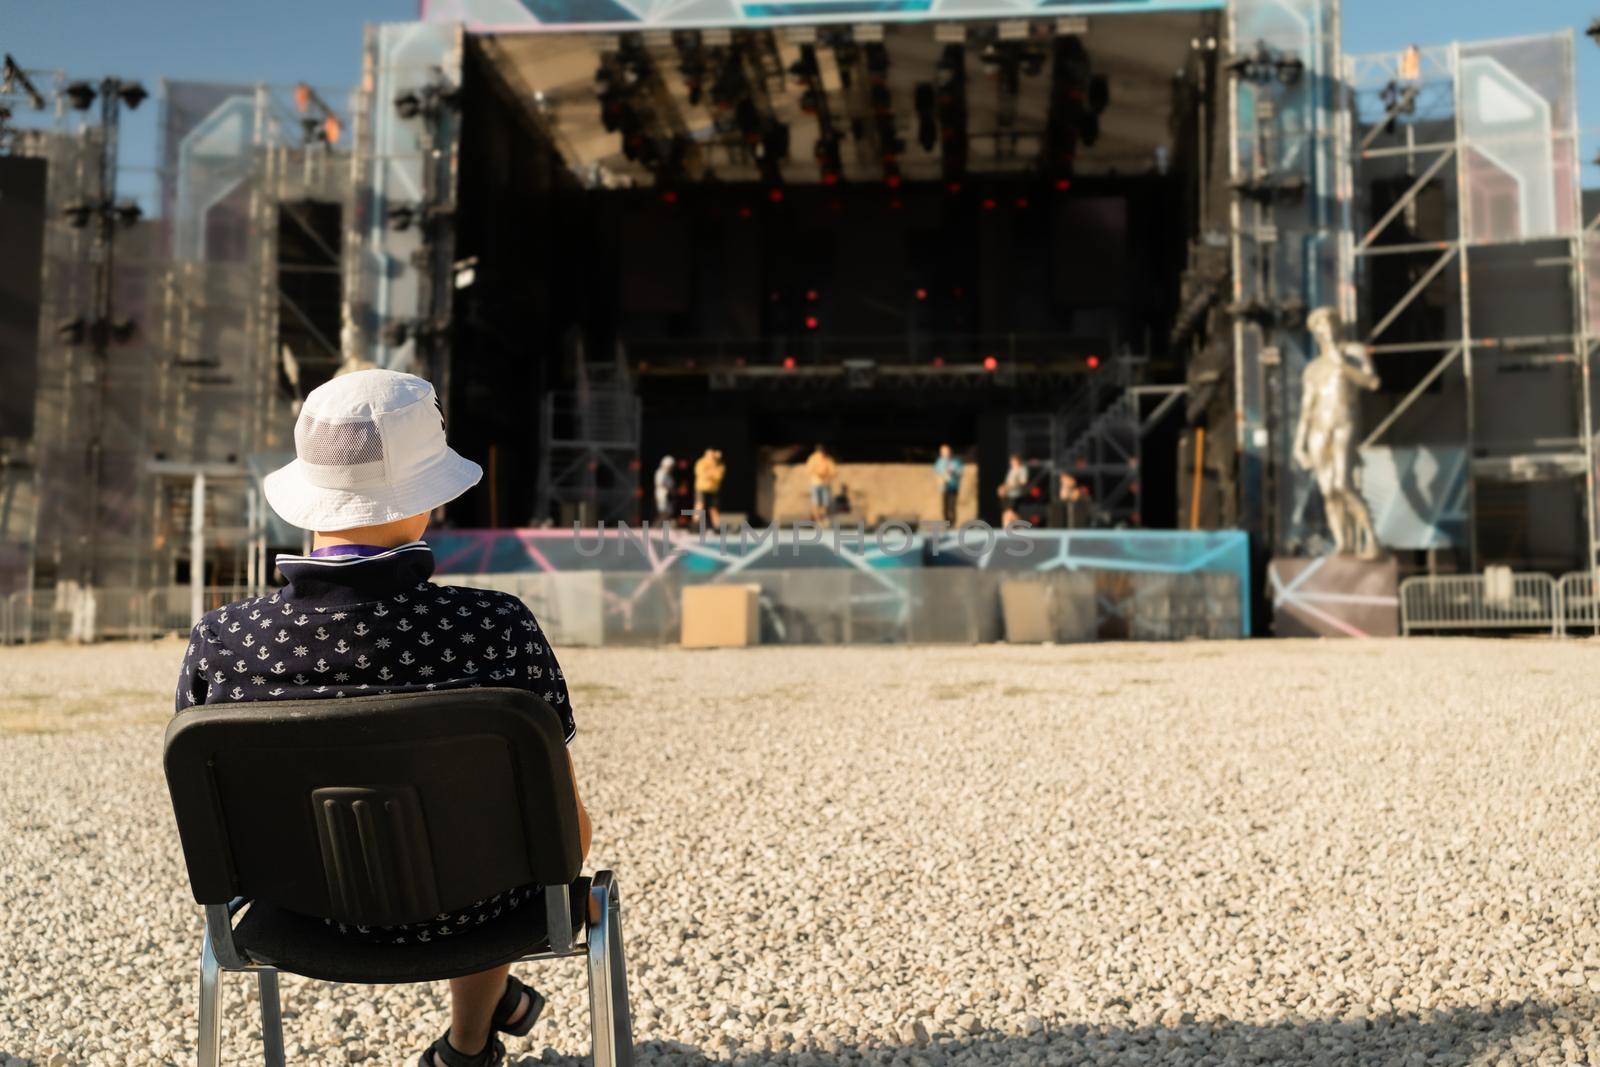 in front of the huge open stage where the art festival will take place on a huge empty platform in front of the stage, the director of the show is sitting on a chair and watching the rehearsal going on on stage by olex